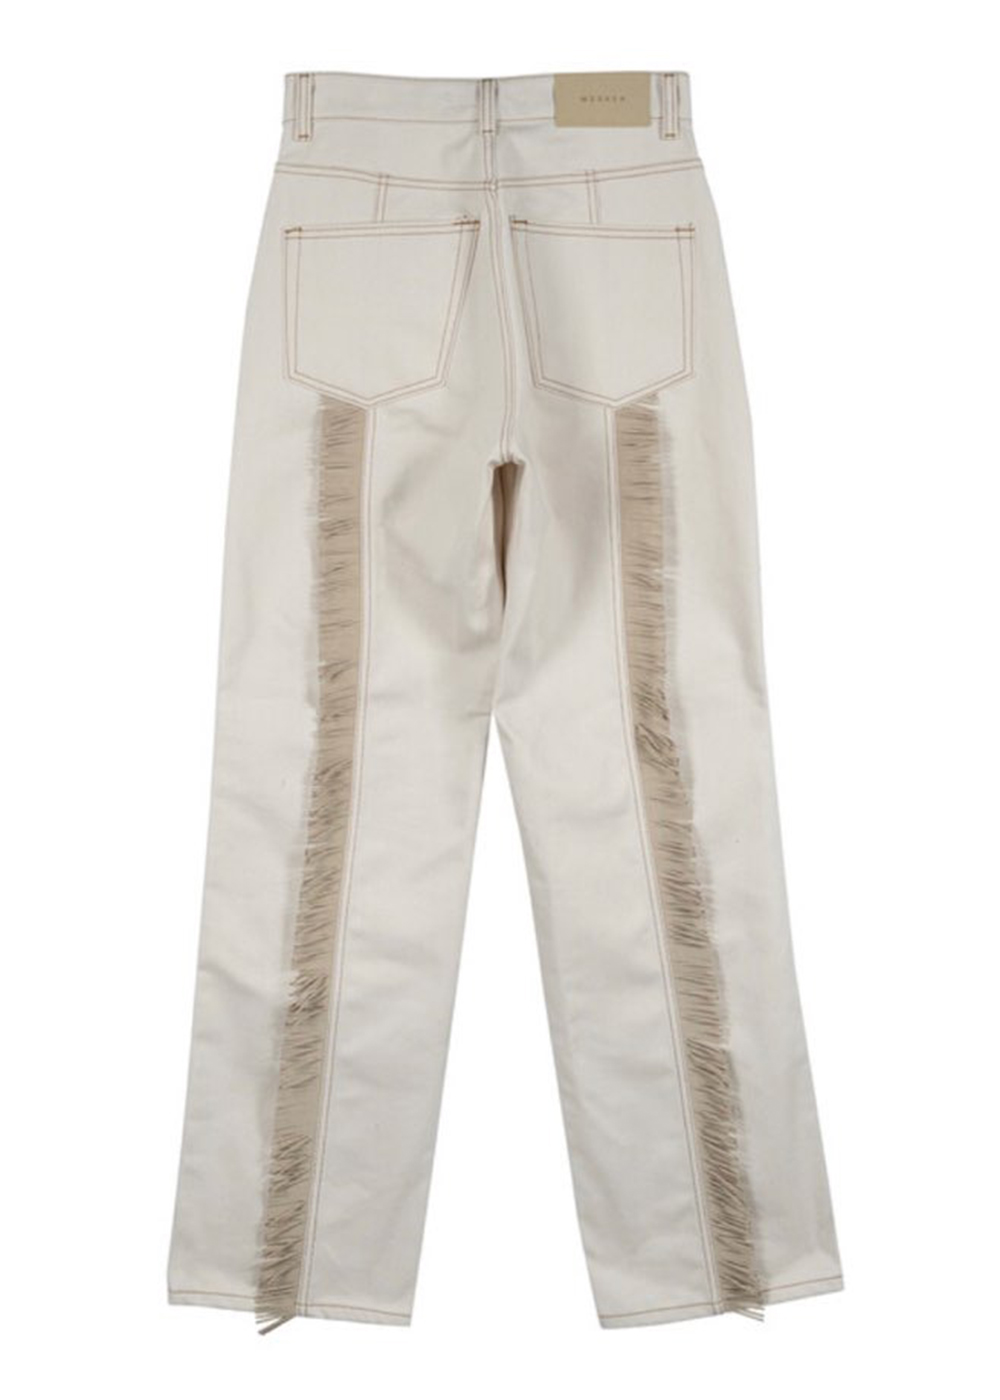 SIDE STUDDED WITH TASSLE DETAIL JEANS (WHITE)